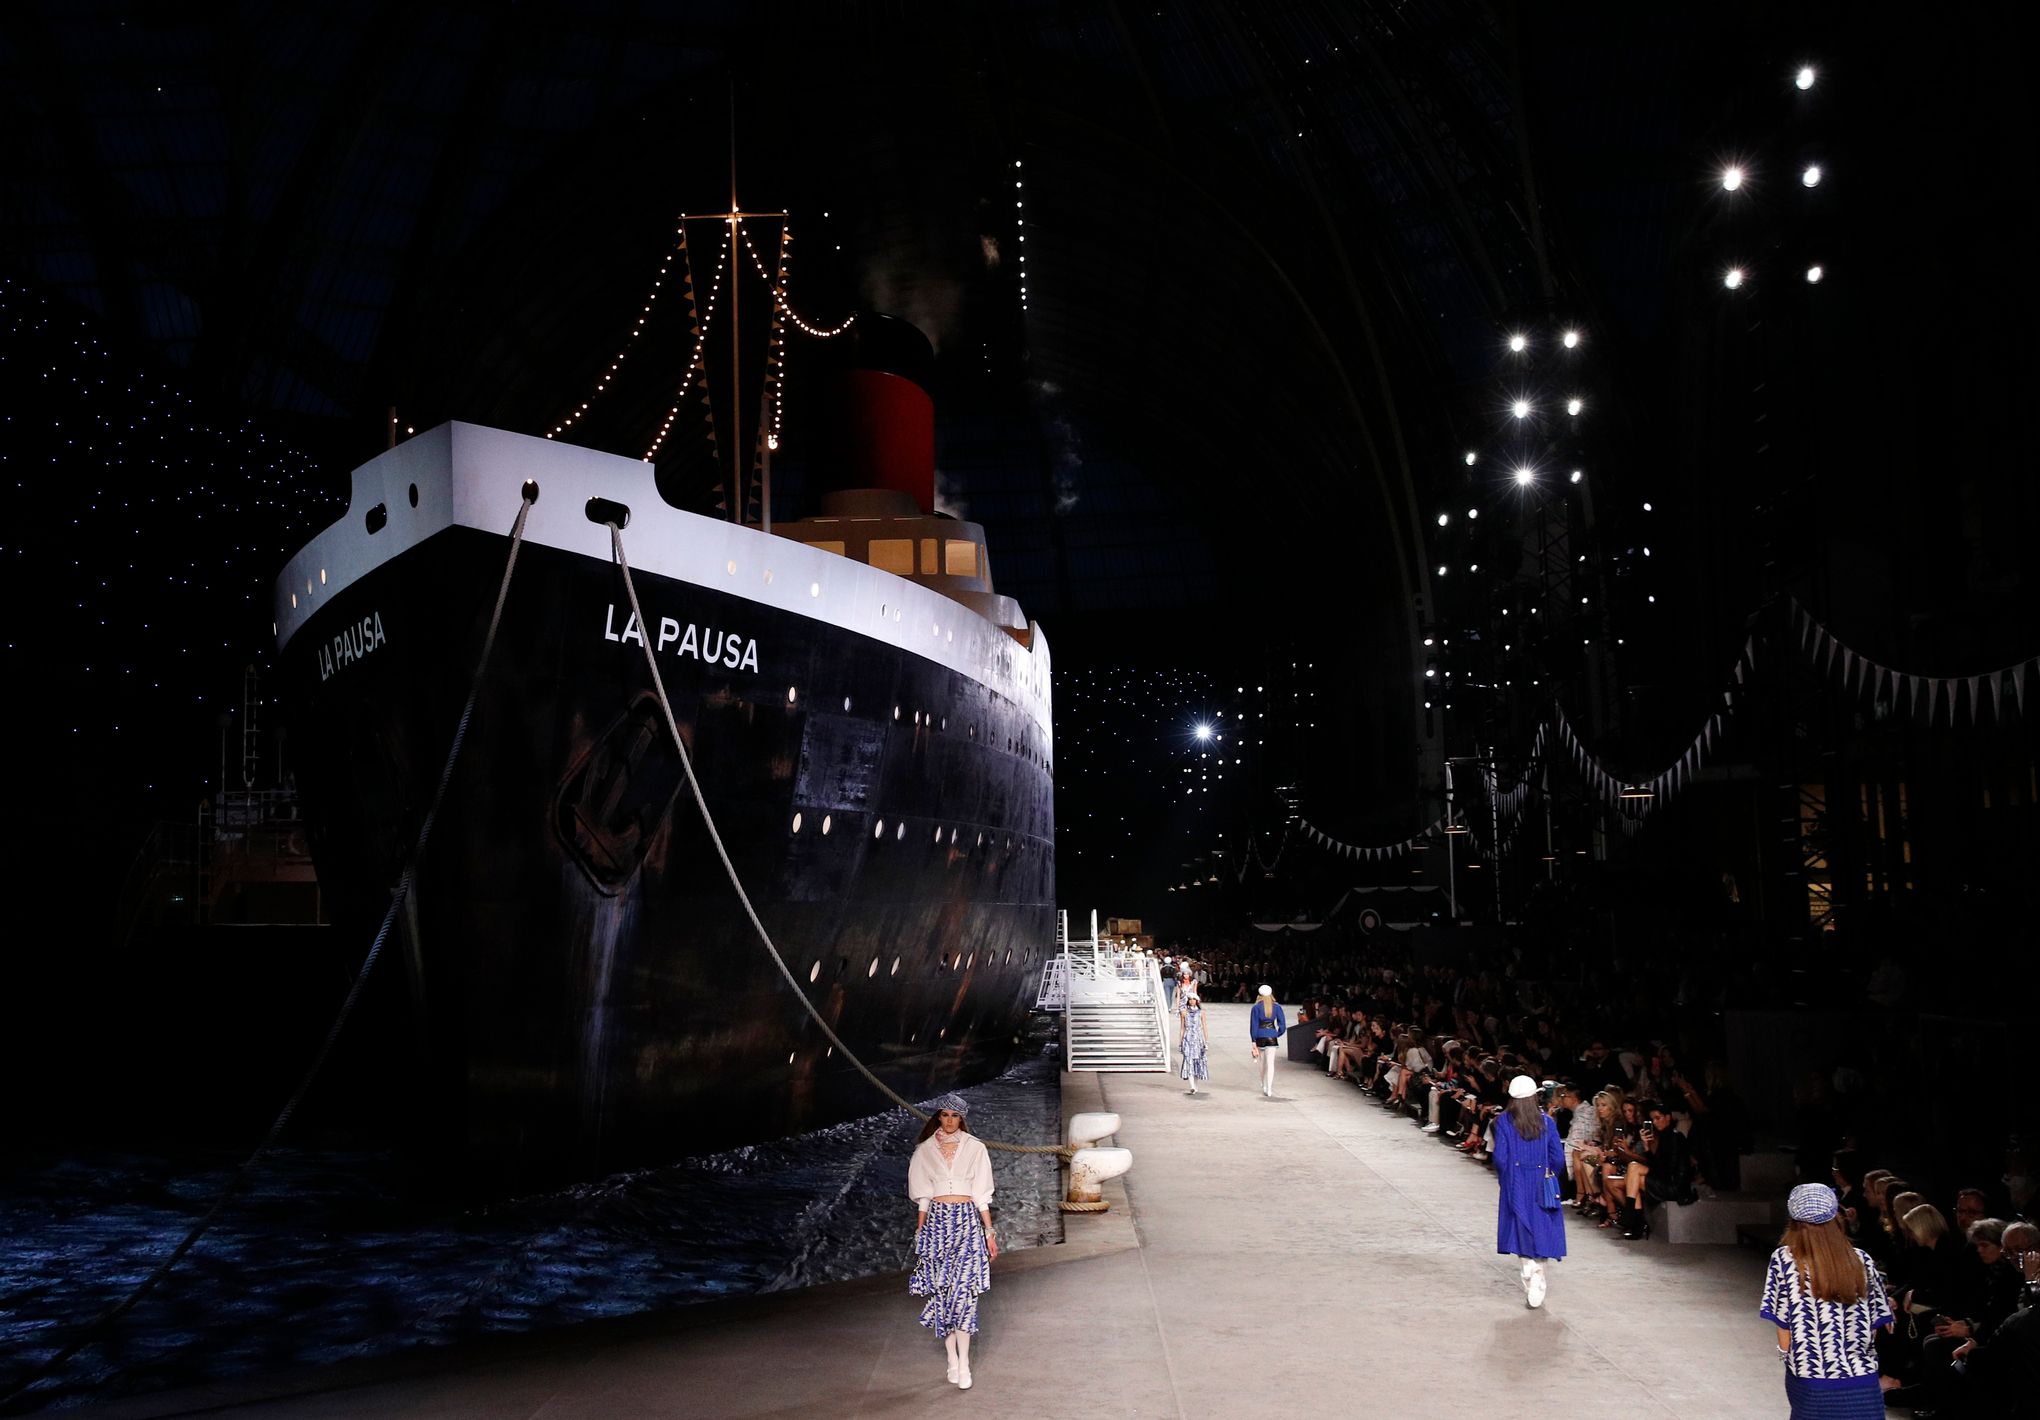 Chanel wows celebrities with ship for cruise show in Paris